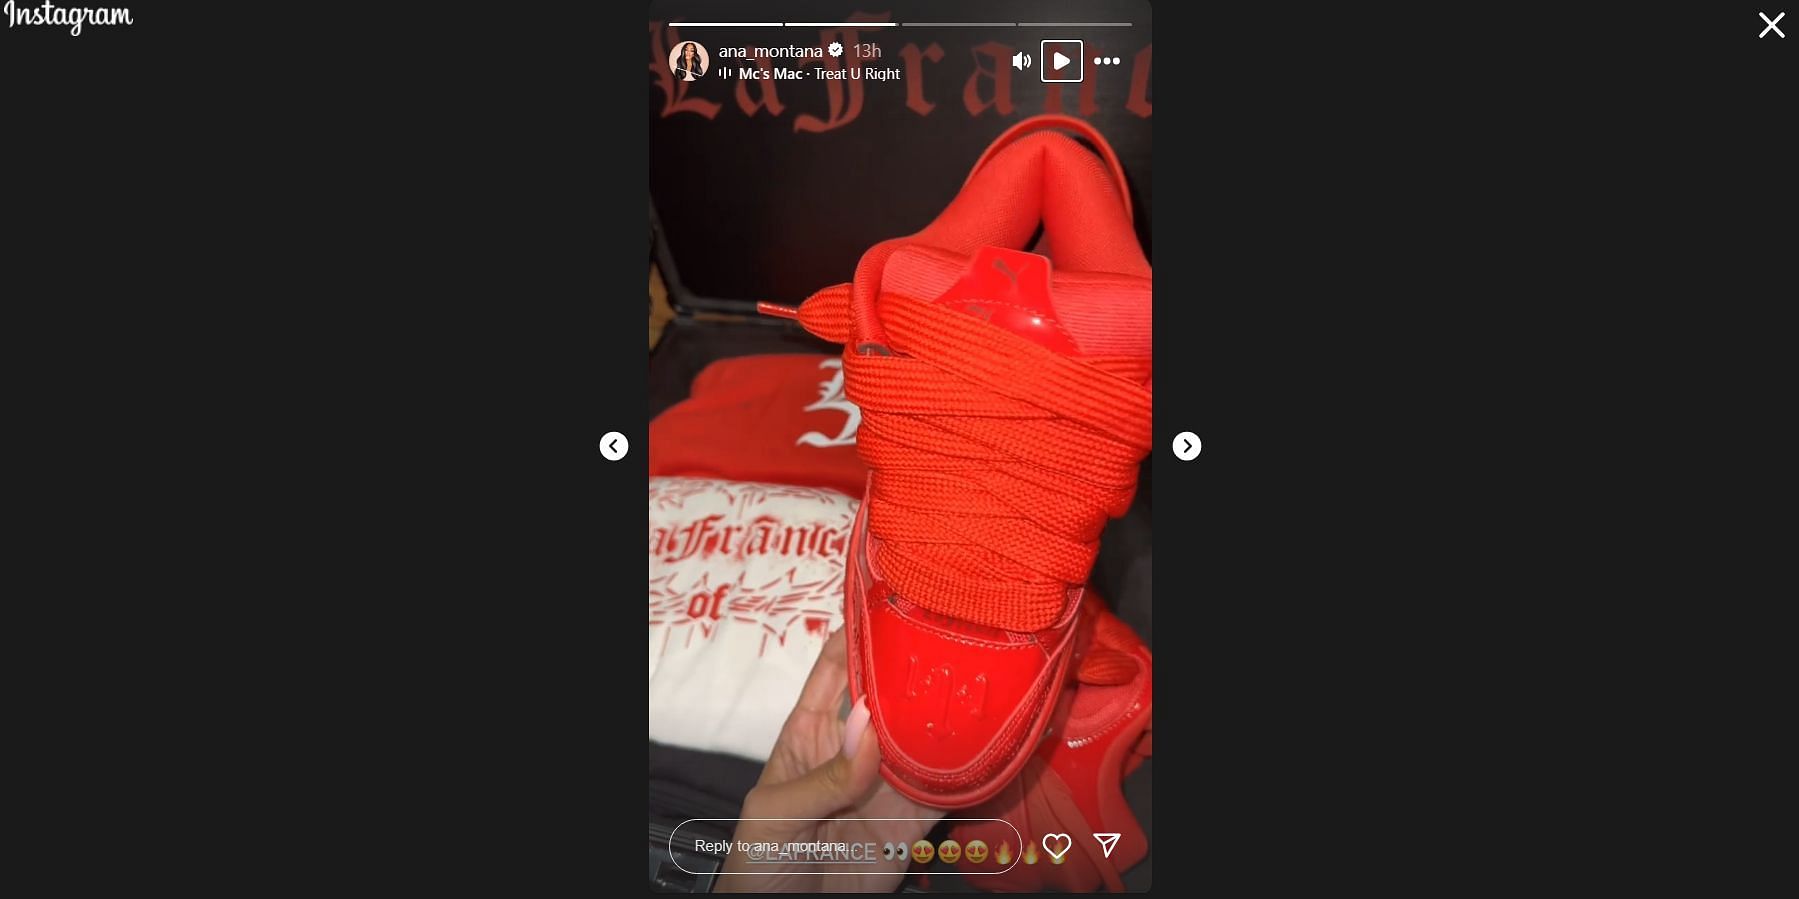 Ana Montana shows LaFrance Sneakers on her Instagram story